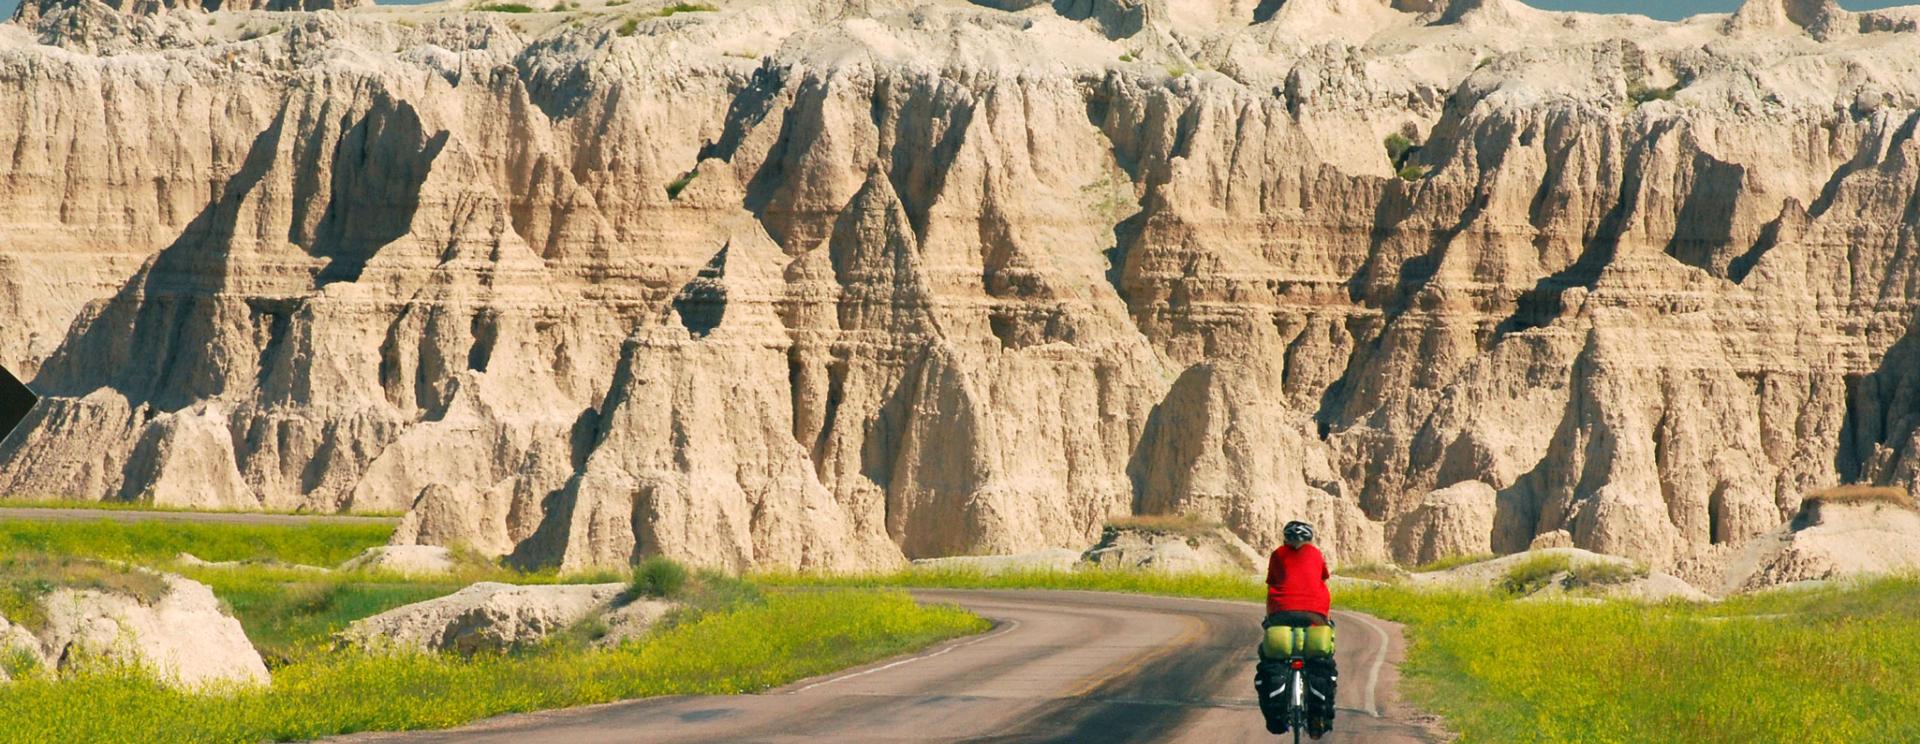 Bicycling the Badlands